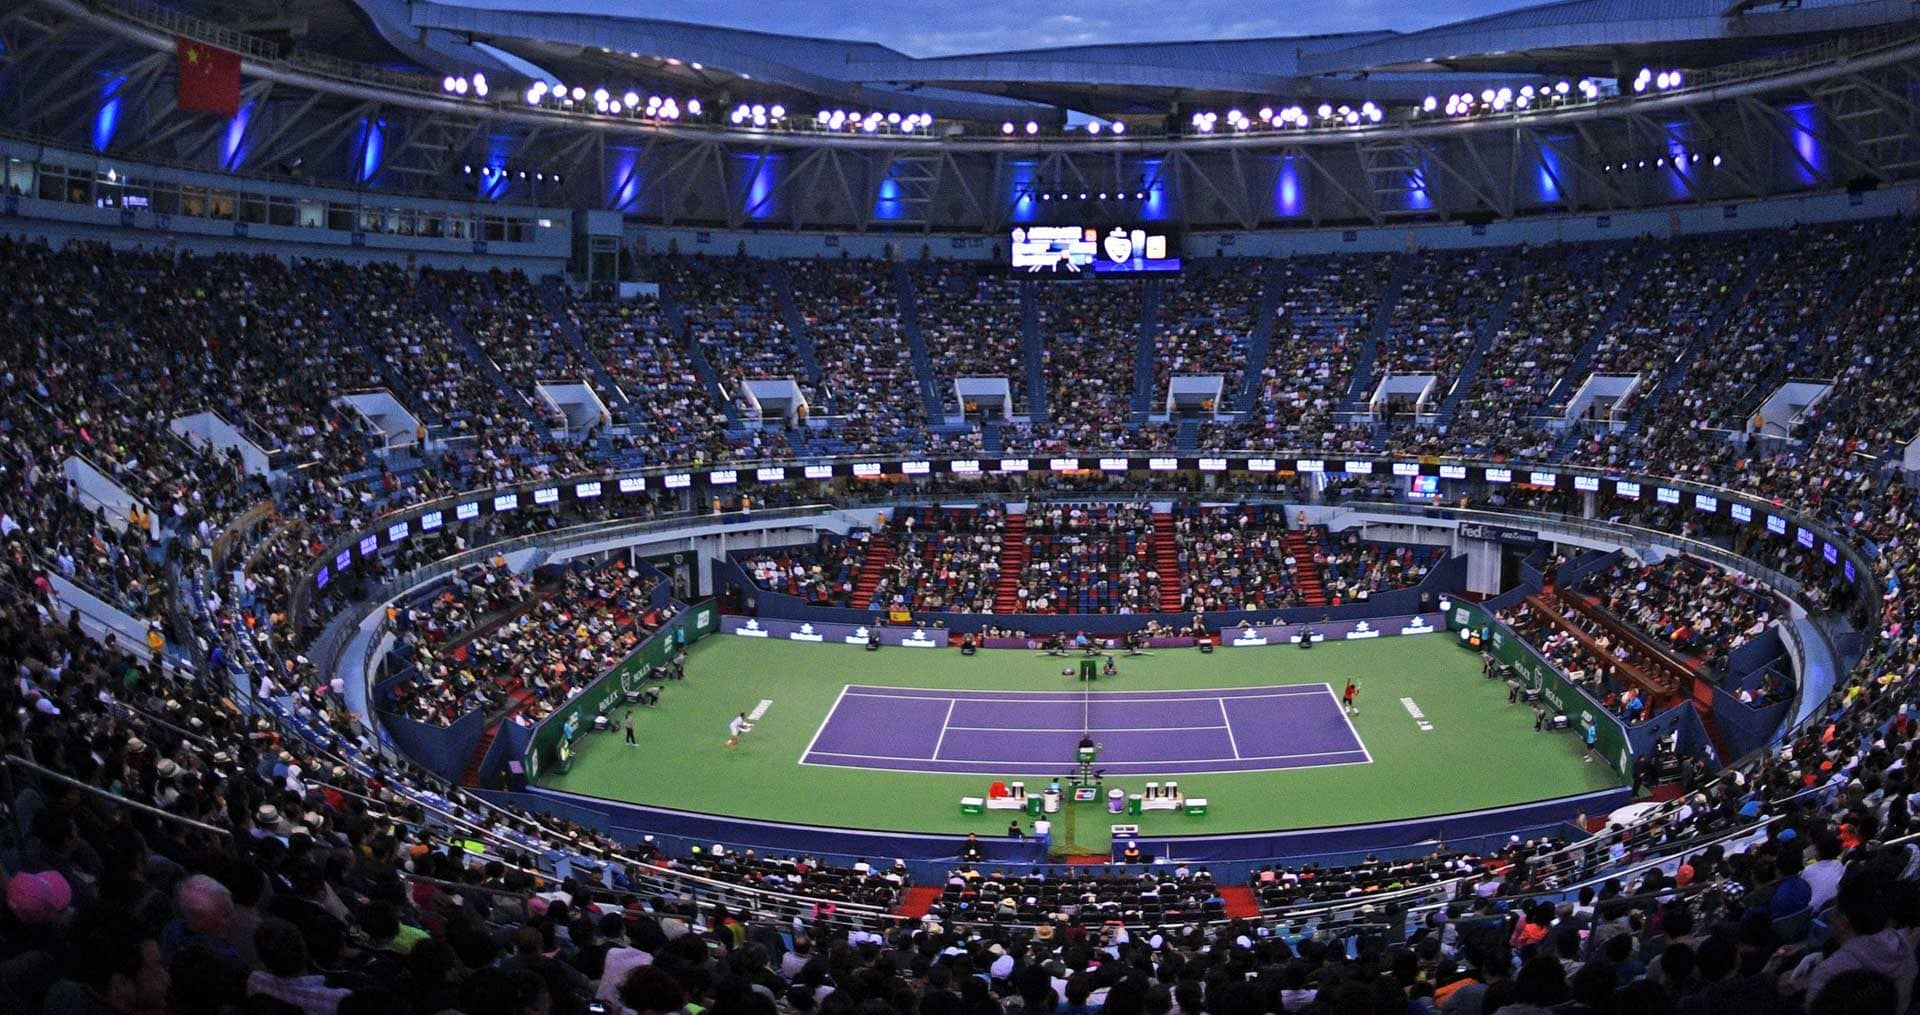 ATP Masters 1000 Shanghai | Overview 